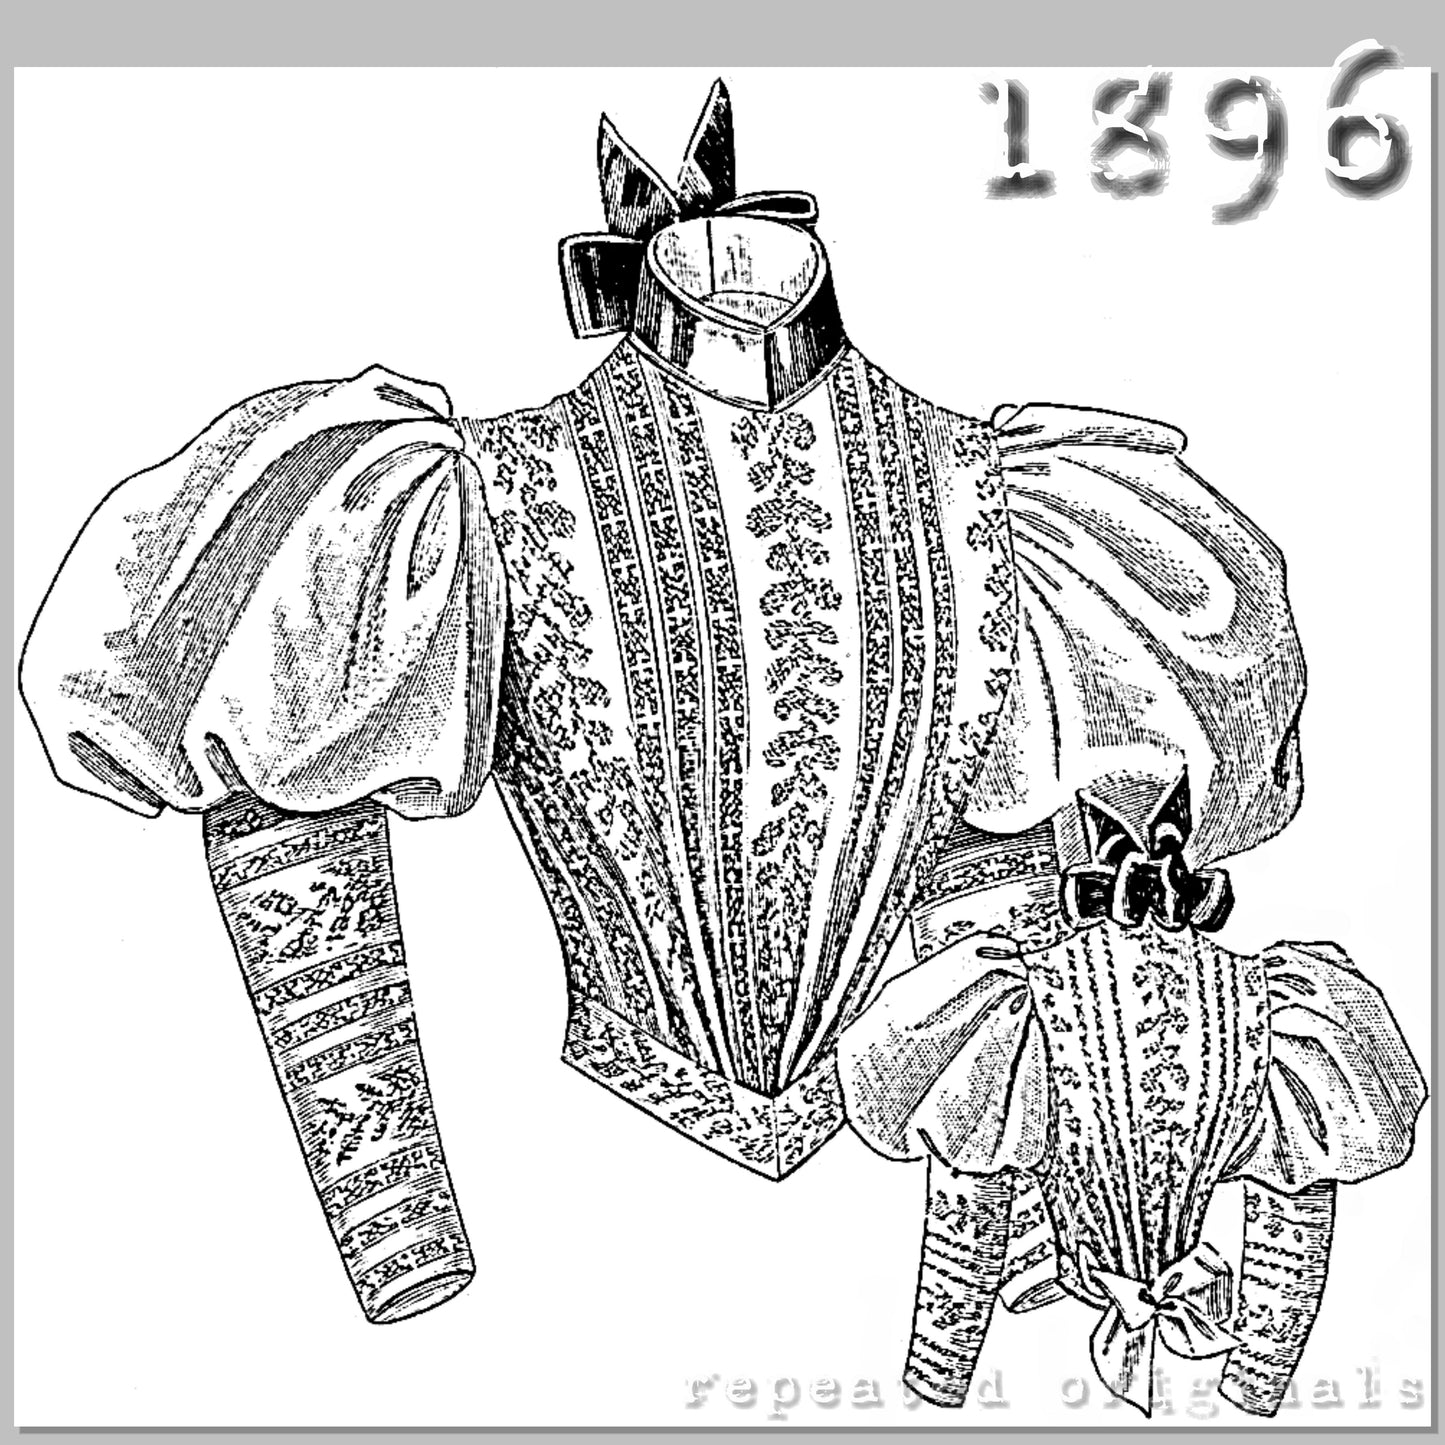 1896 Blouse with Cross Stitch Embroidery Sewing Pattern - INSTANT DOWNLOAD PDF